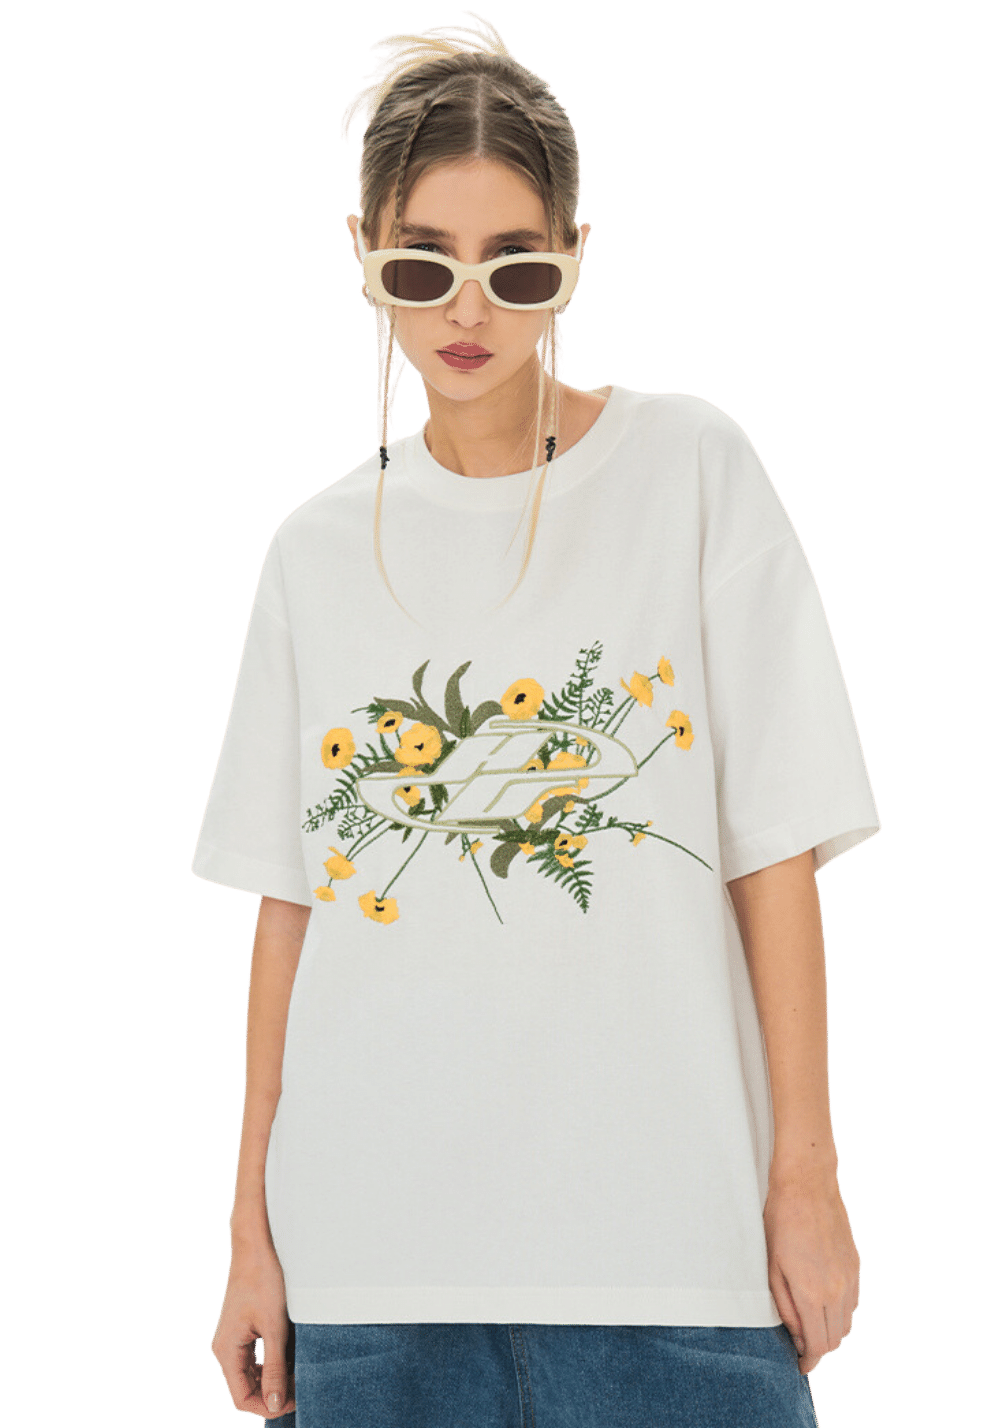 Floral Line Art Logo Embroidered  T-Shirt - PSYLOS 1, Floral Line Art Logo Embroidered  T-Shirt, T-Shirt, HARSH AND CRUEL, PSYLOS 1